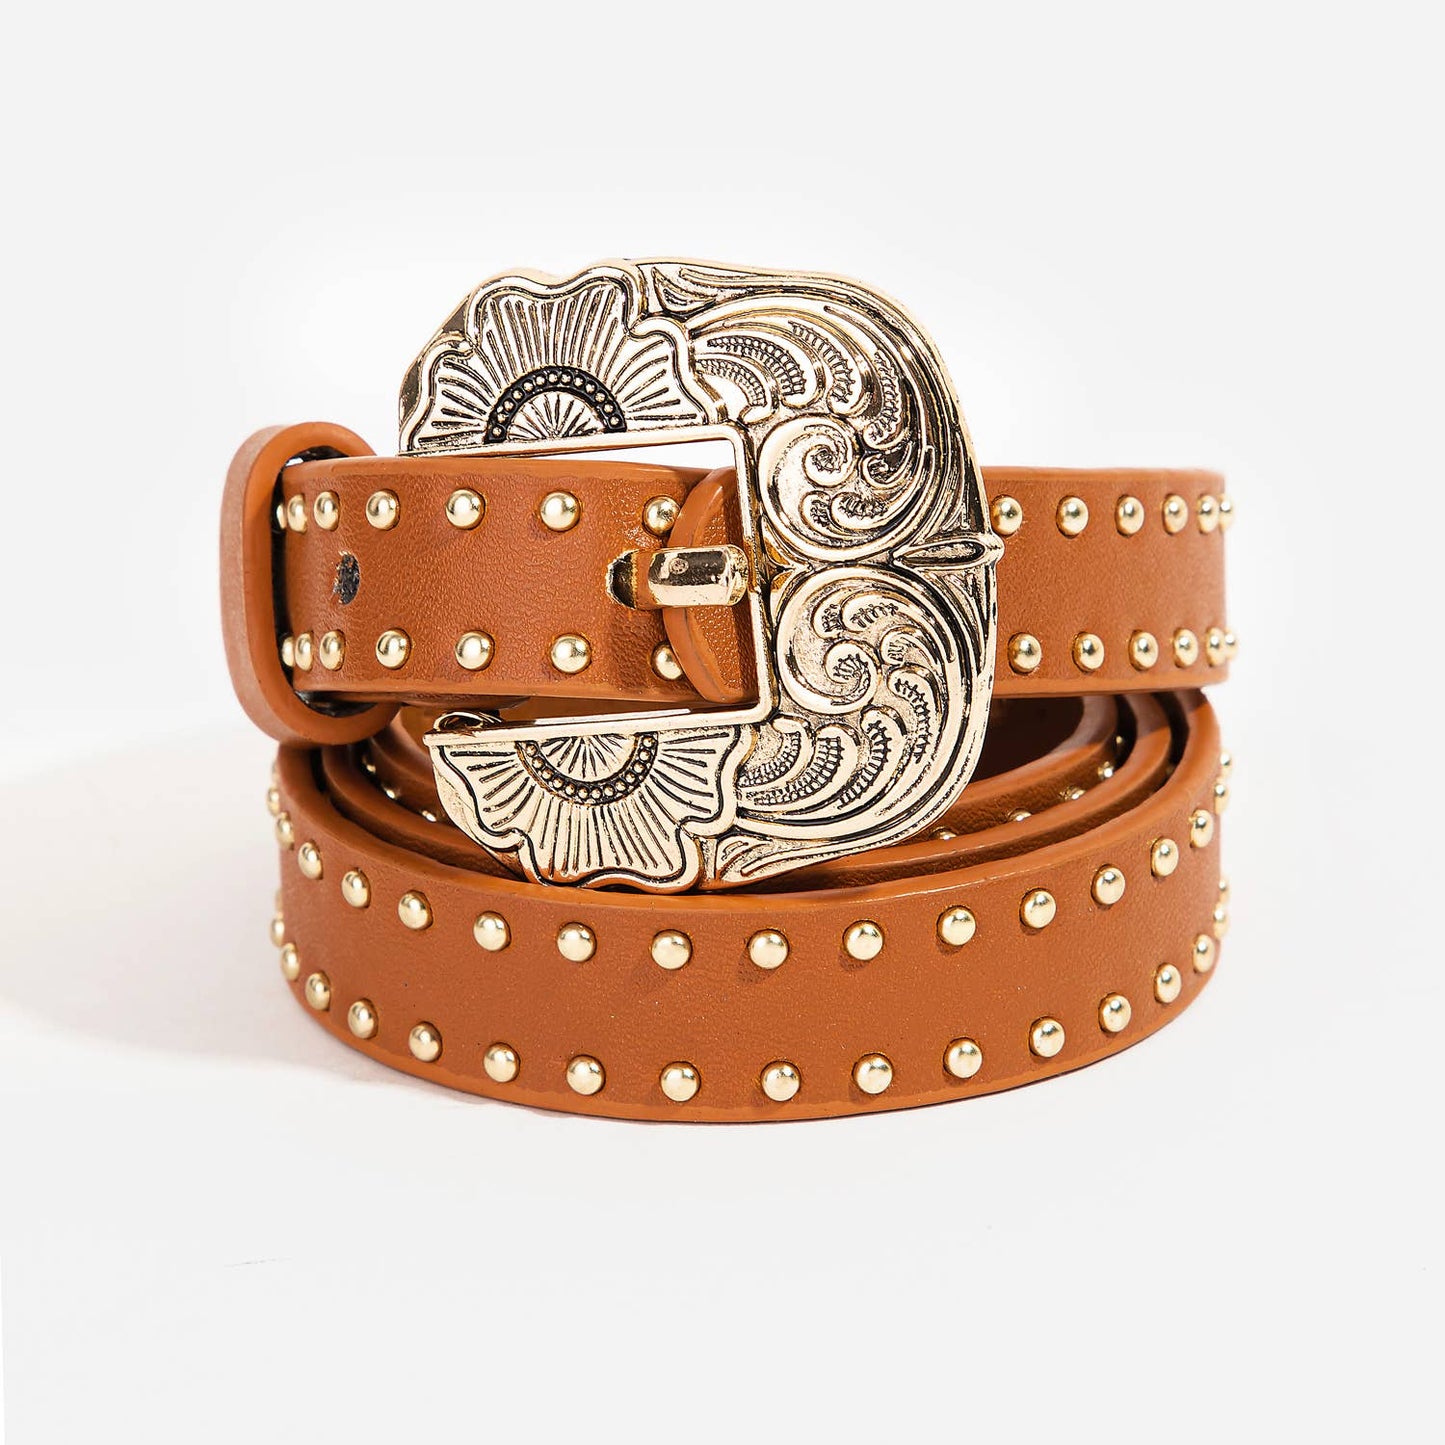 Studded Faux Leather Ornate Buckle Belt